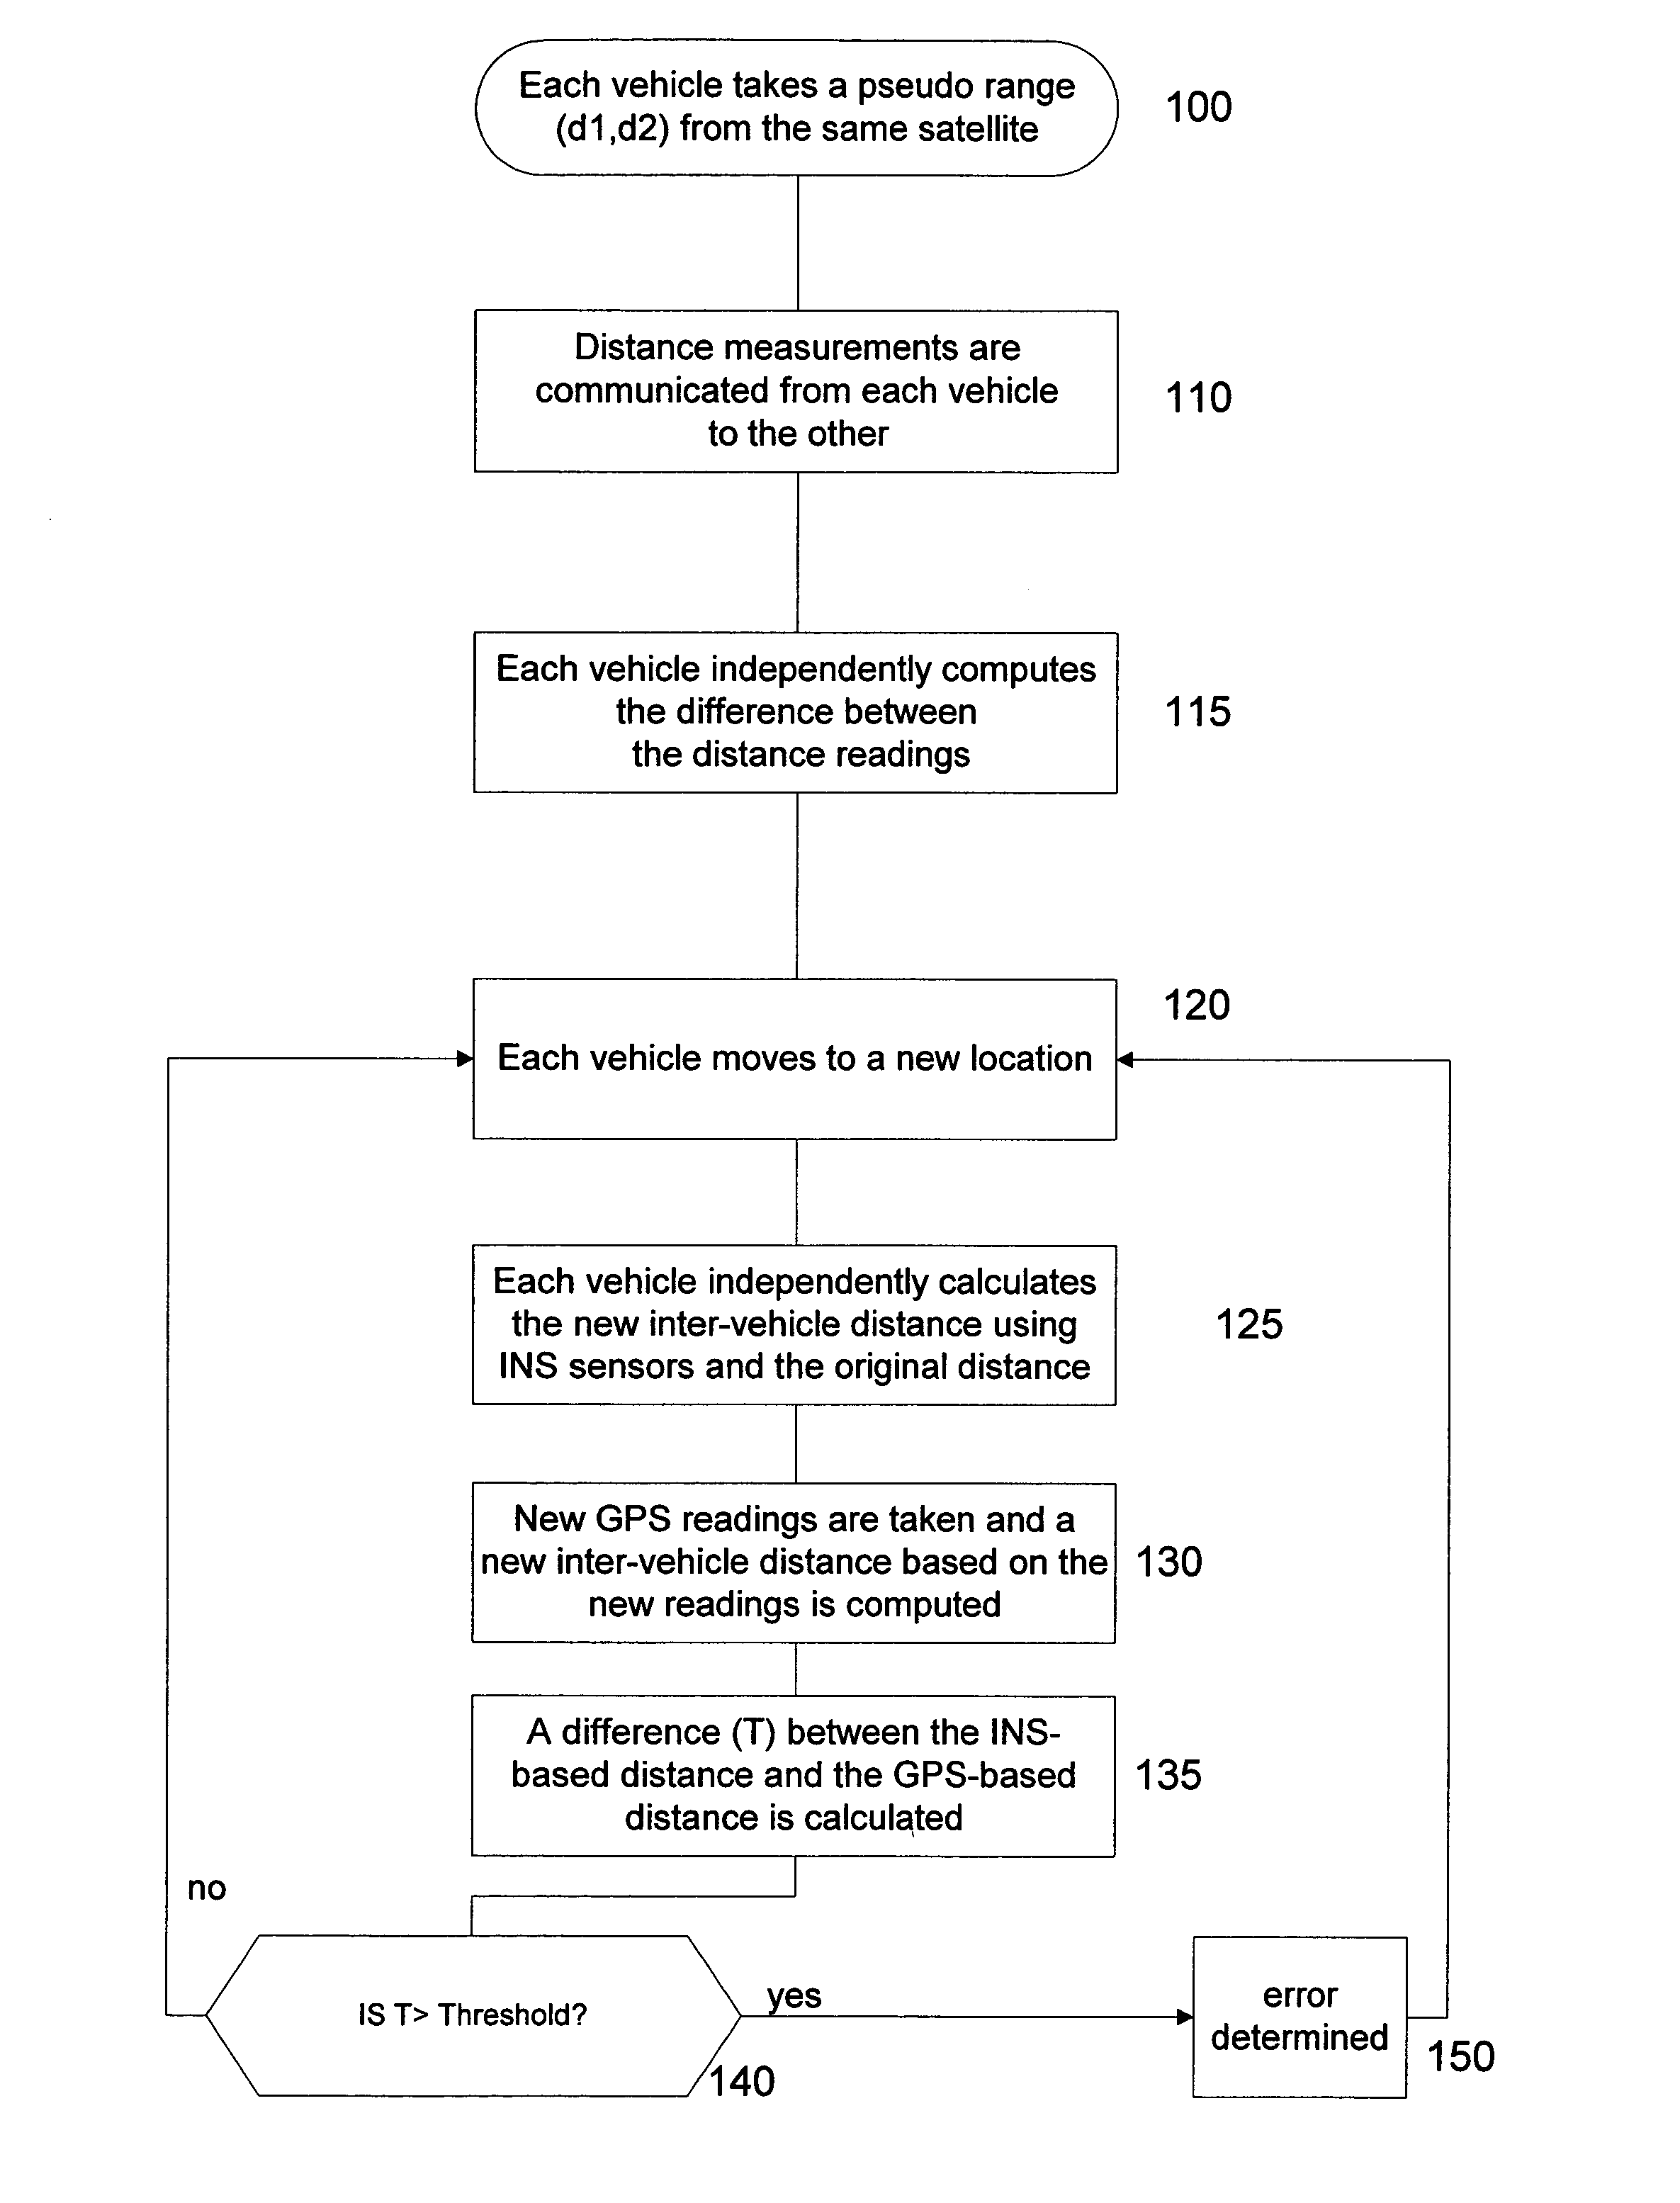 Method for improving GPS integrity and detecting multipath interference using inertial navigation sensors and a network of mobile receivers